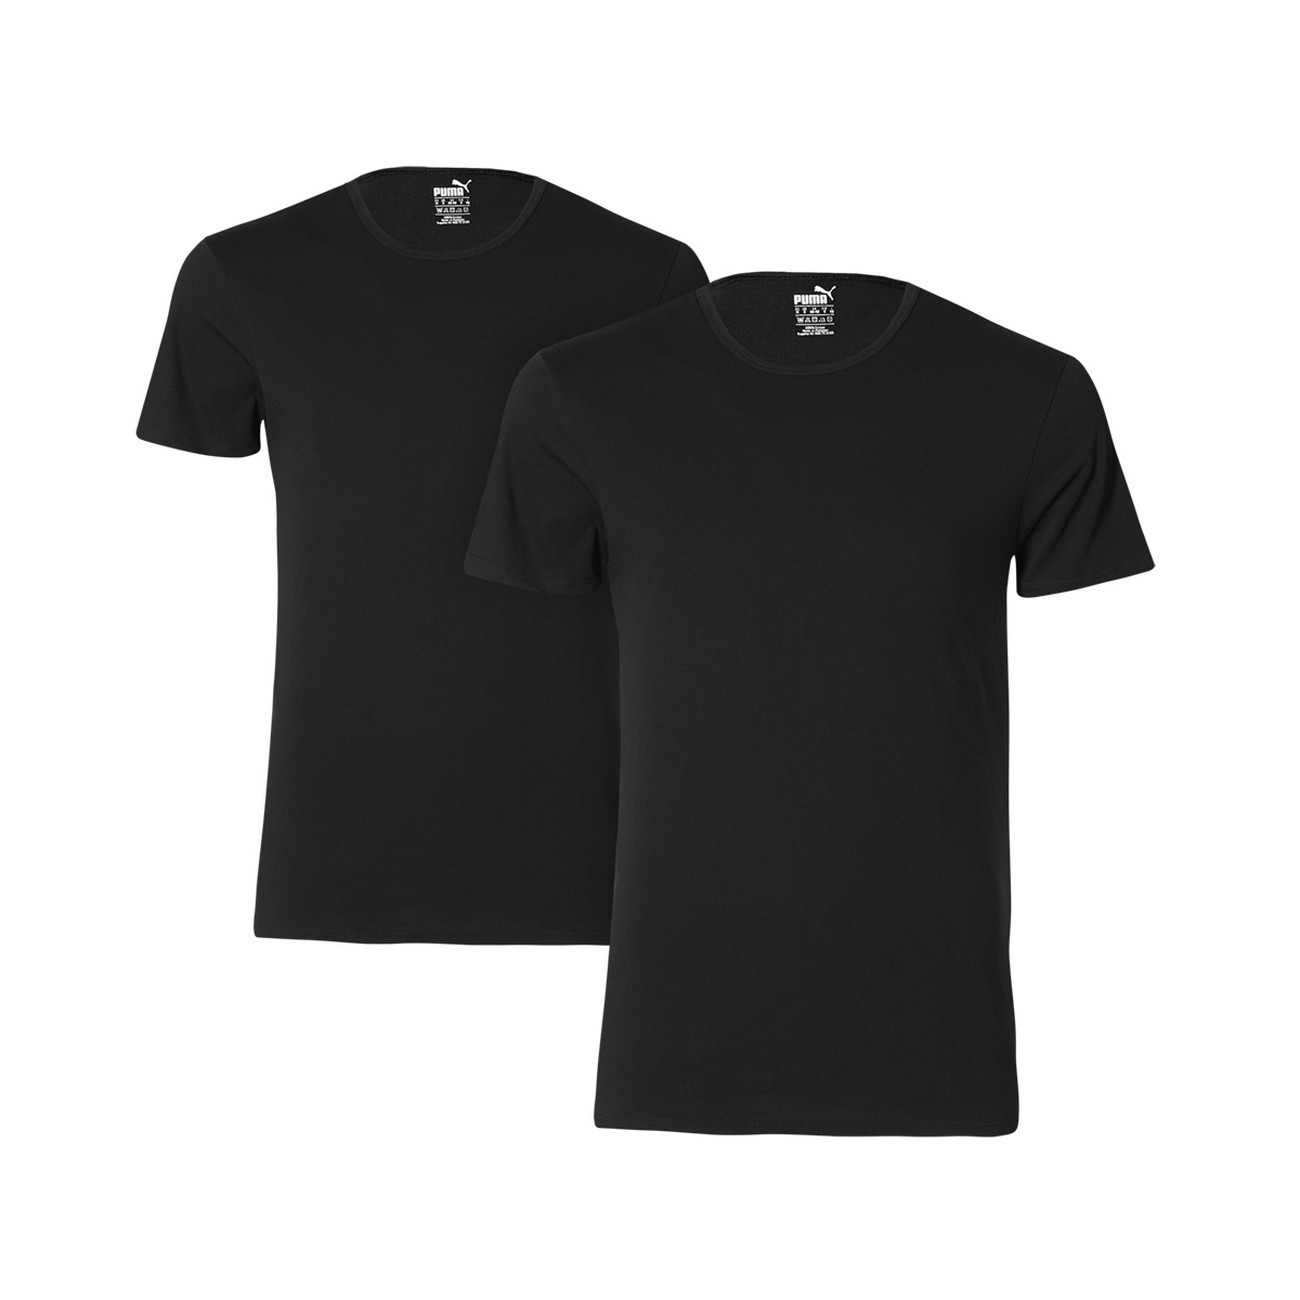 Puma T-Shirts pack of 2 arrived Europe